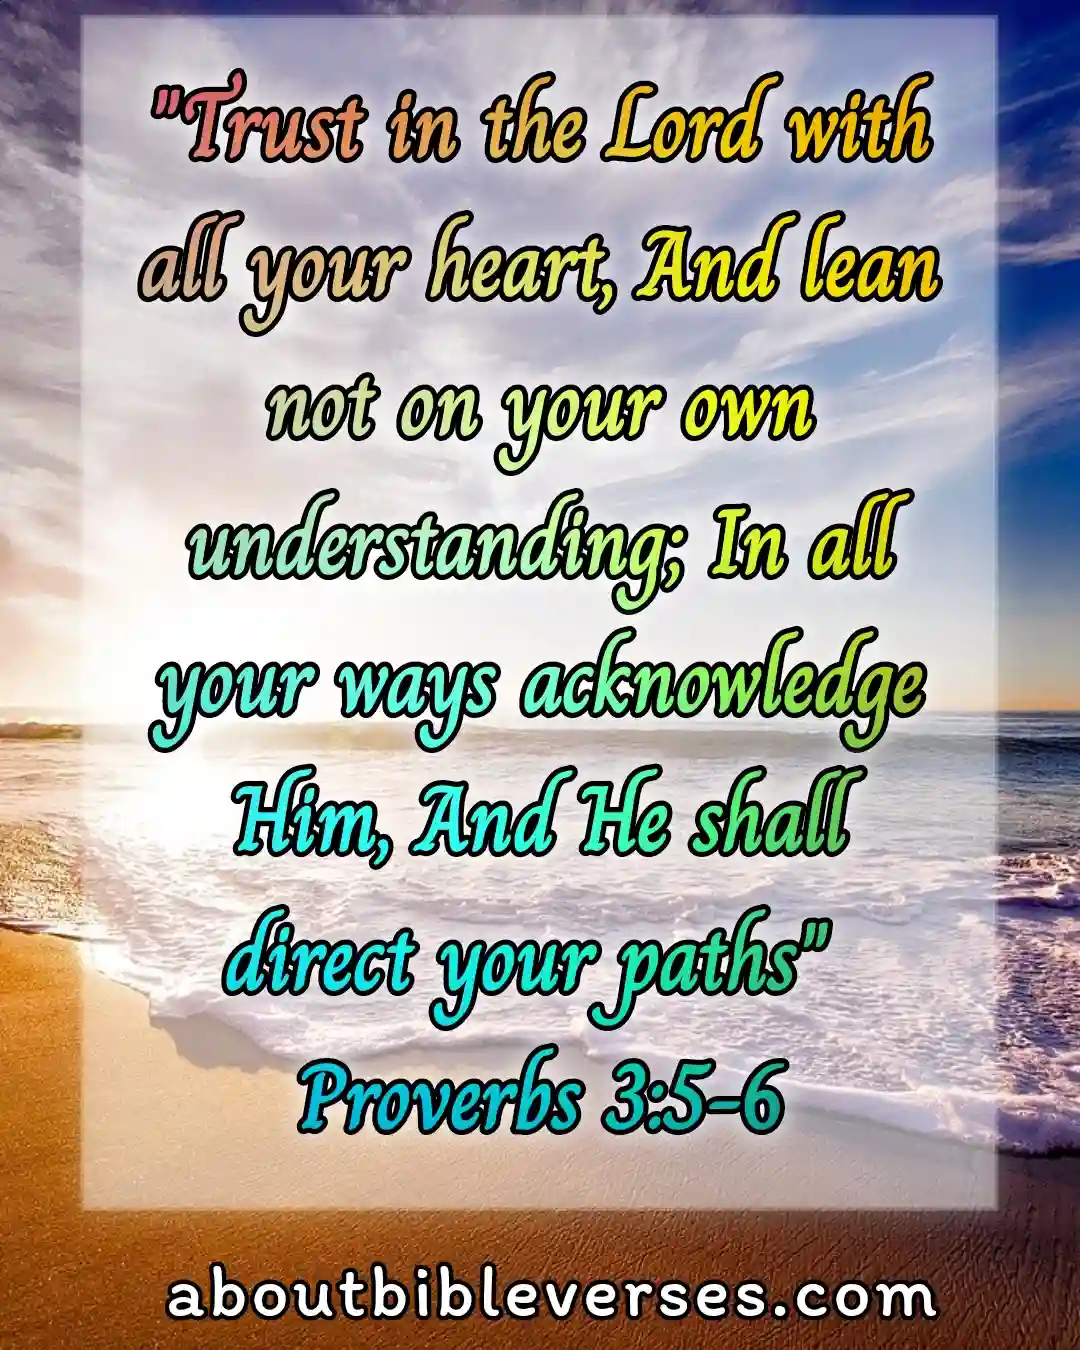 dependence on god bible verses (Proverbs 3:5-6)